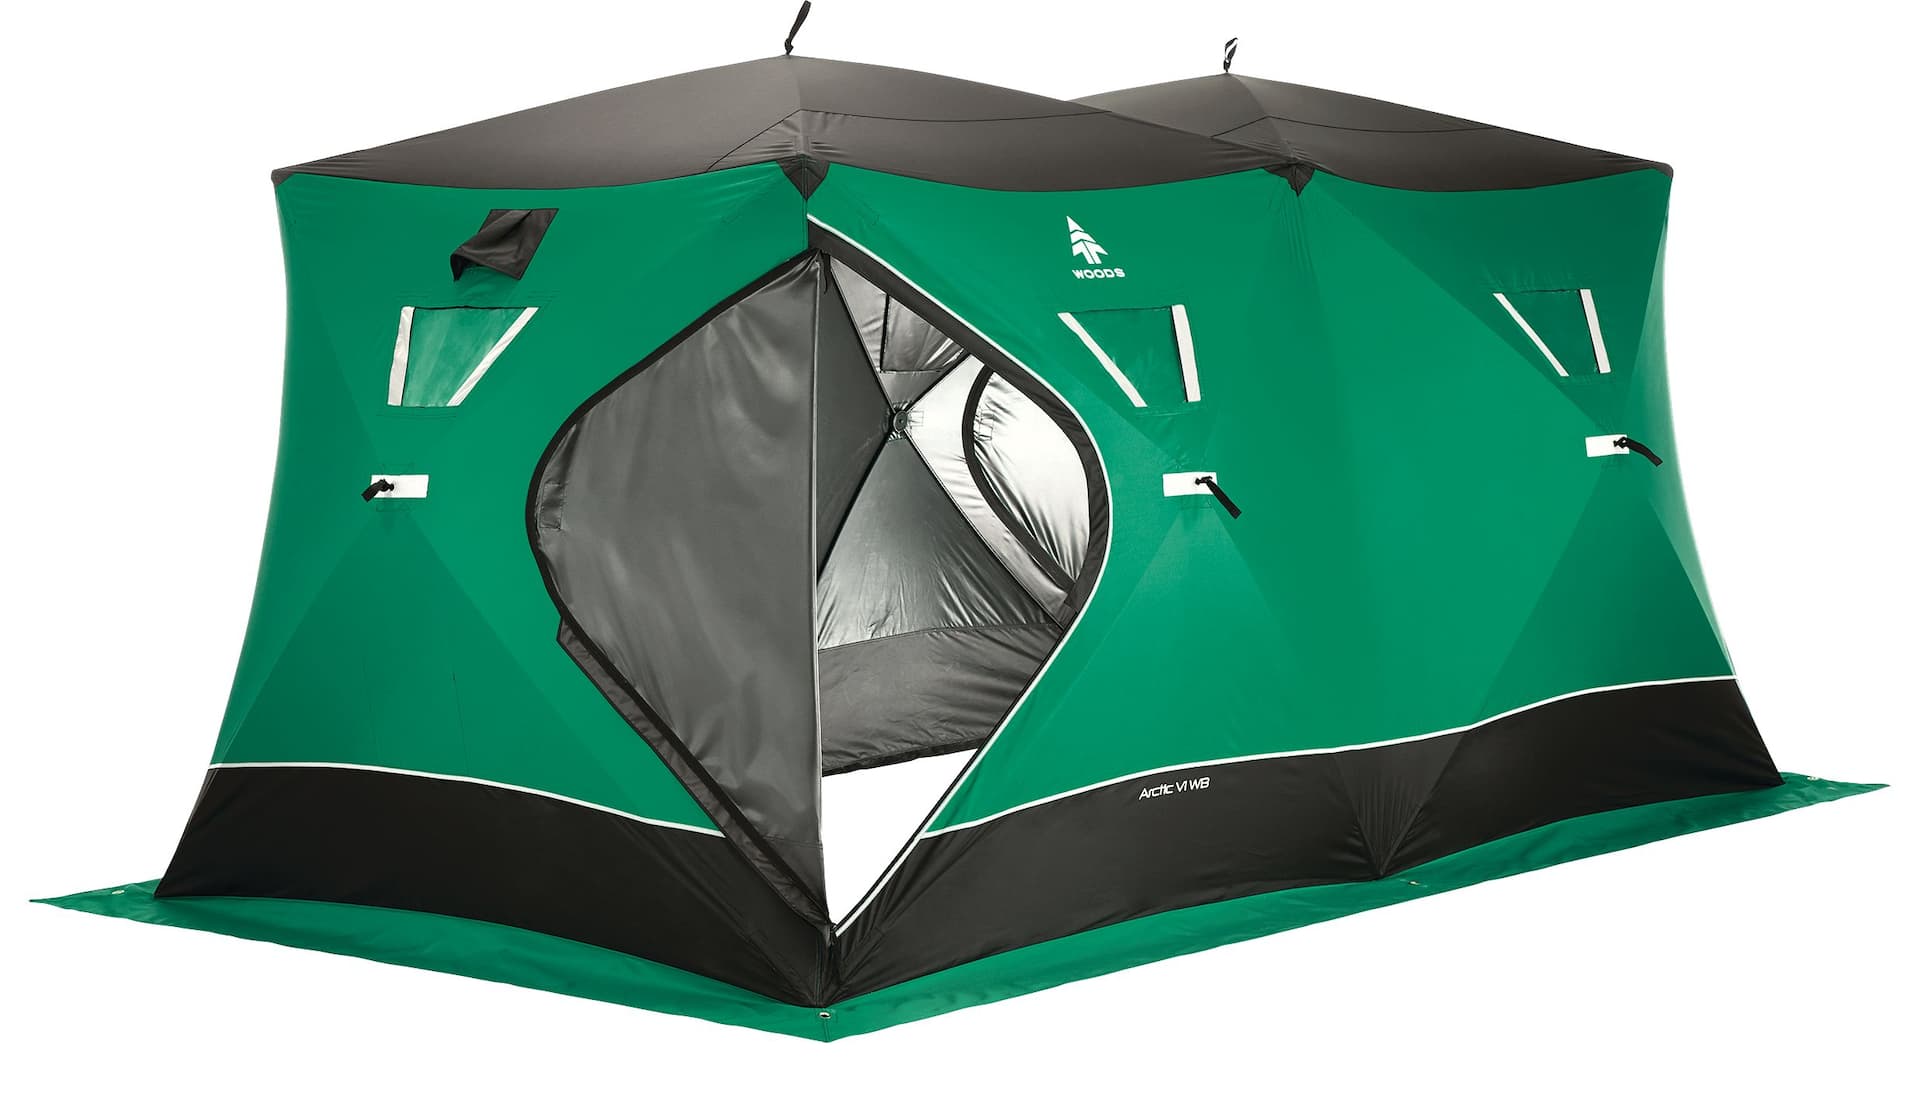 https://media-www.canadiantire.ca/product/playing/fishing/ice-fishing/0778482/woods-arctic-ice-shelter-6-person-e69a524e-9335-421d-8a9b-0497bca50e8e-jpgrendition.jpg